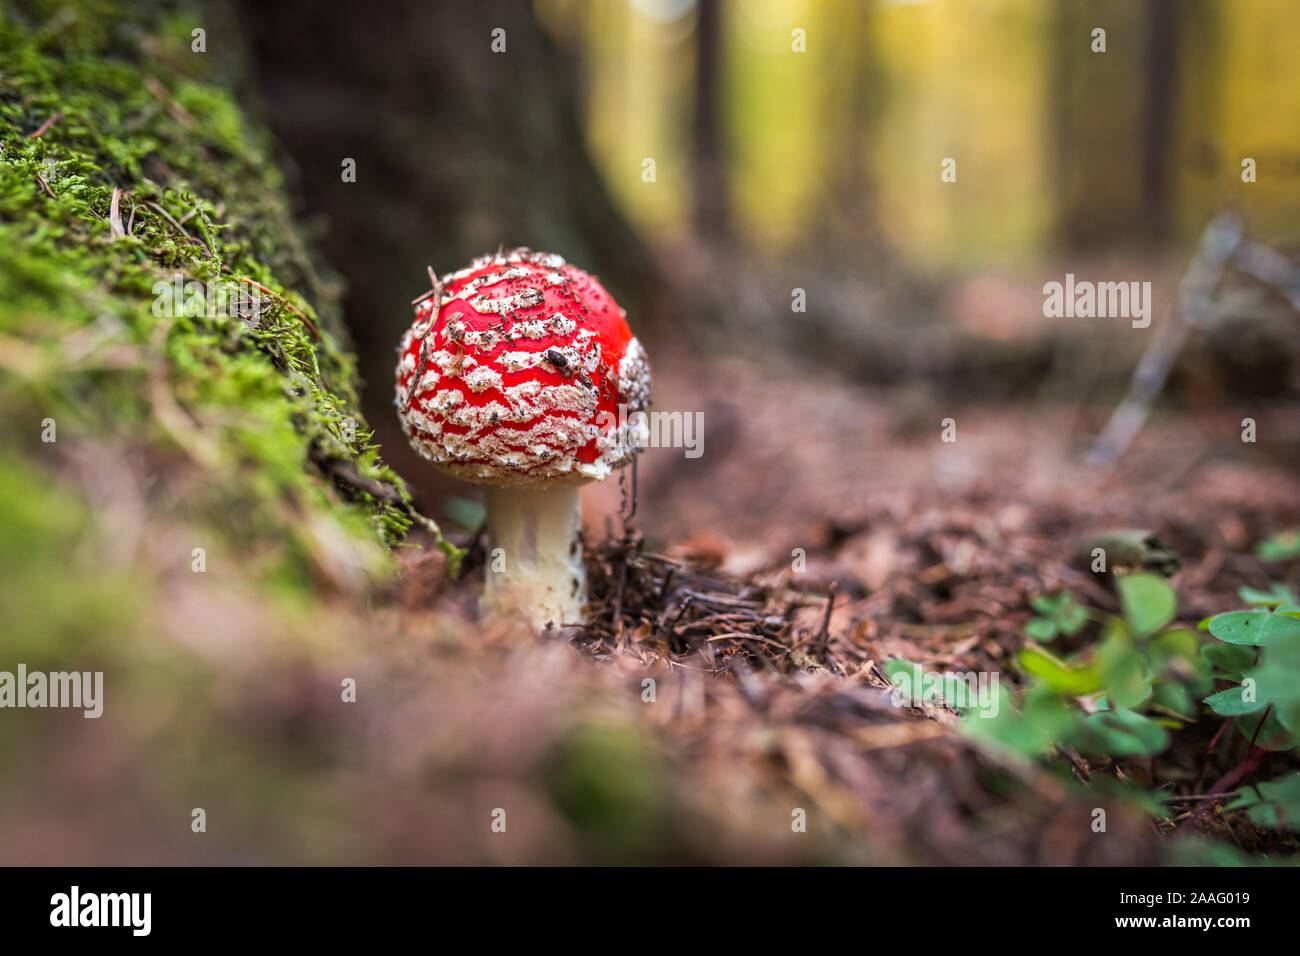 Amanita muscaria, commonly known as the fly agaric or fly amanita, is a basidiomycete of the genus Amanita. Although as poisonous, reports of human Stock Photo